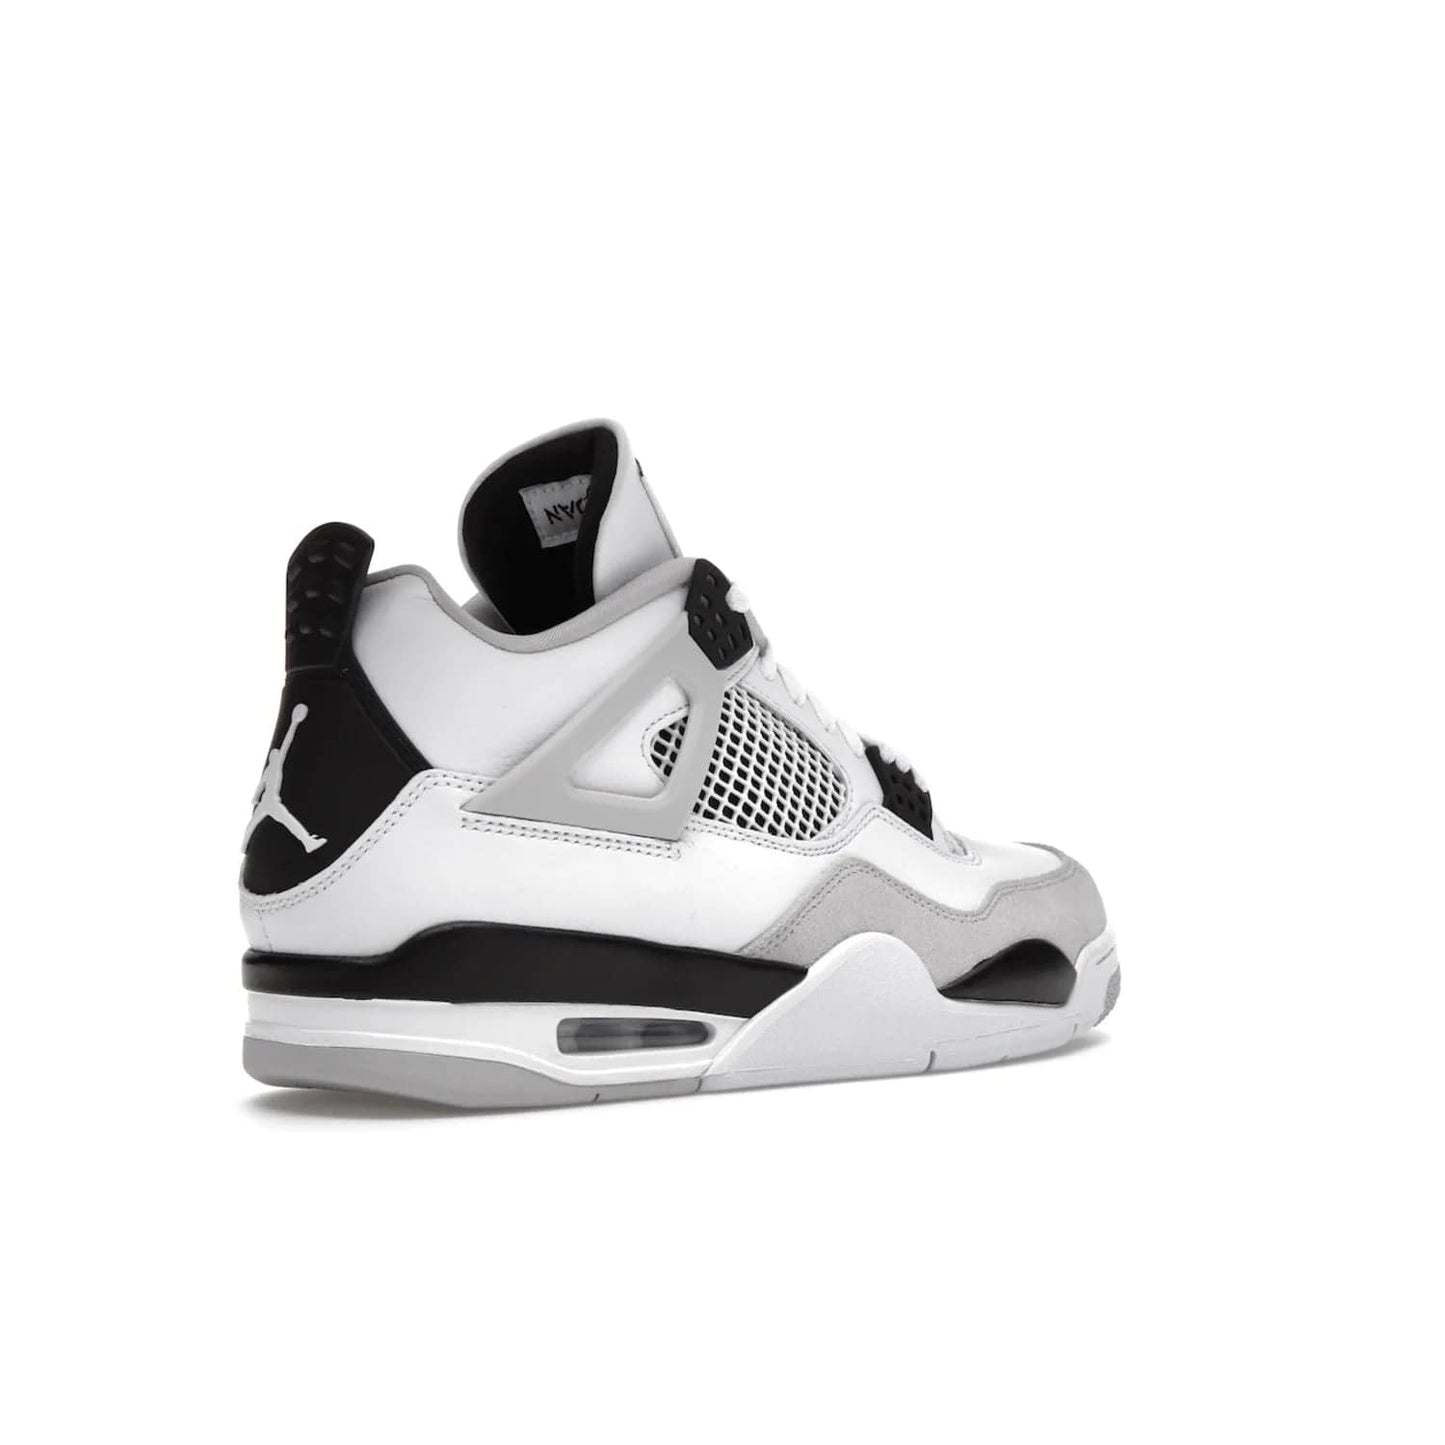 Jordan 4 Retro Military Black - Image 33 - Only at www.BallersClubKickz.com - Updated Air Jordan 4 style with a white/black/light grey sole and visible Air unit. Released in May 2022, offering timeless classic style and comfort.